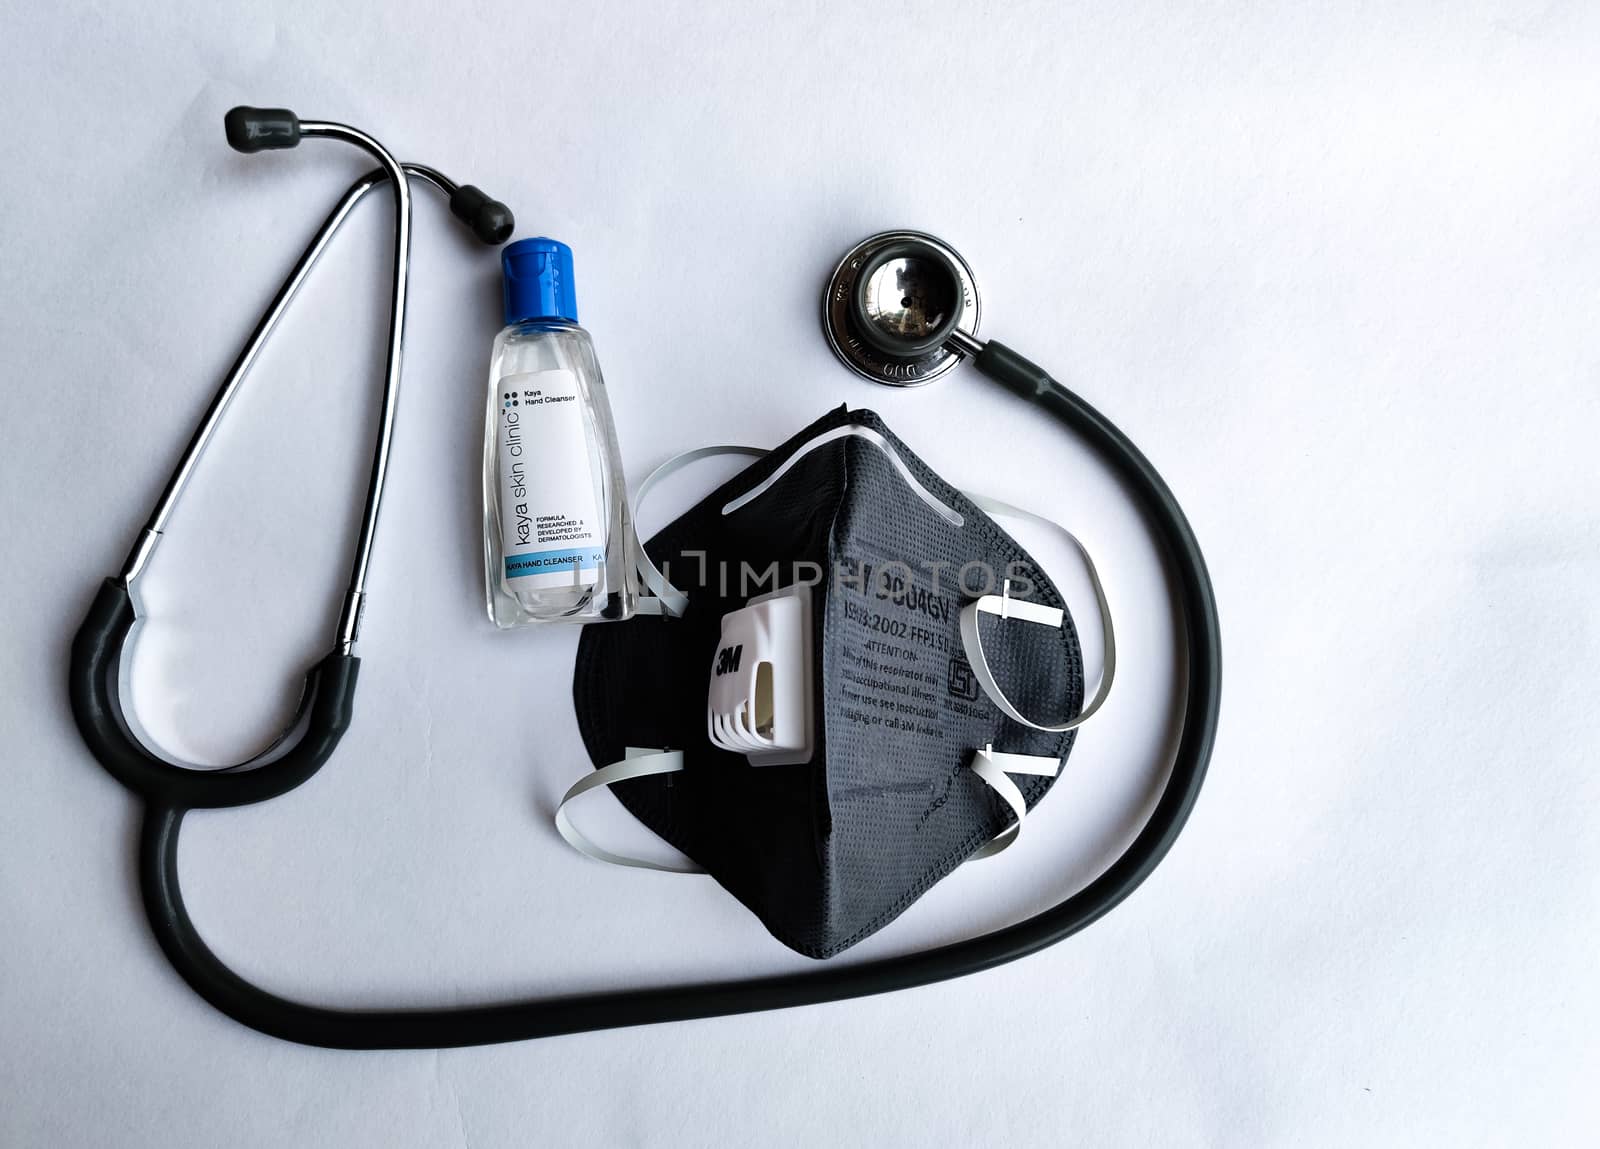 Milan, Italy, 2020. 3M Grey N95 face mask, sanitizer and stethoscope on a white background denoting doctor's Corona virus (Covid-19) safety kit to reduce the rate of spread of infections